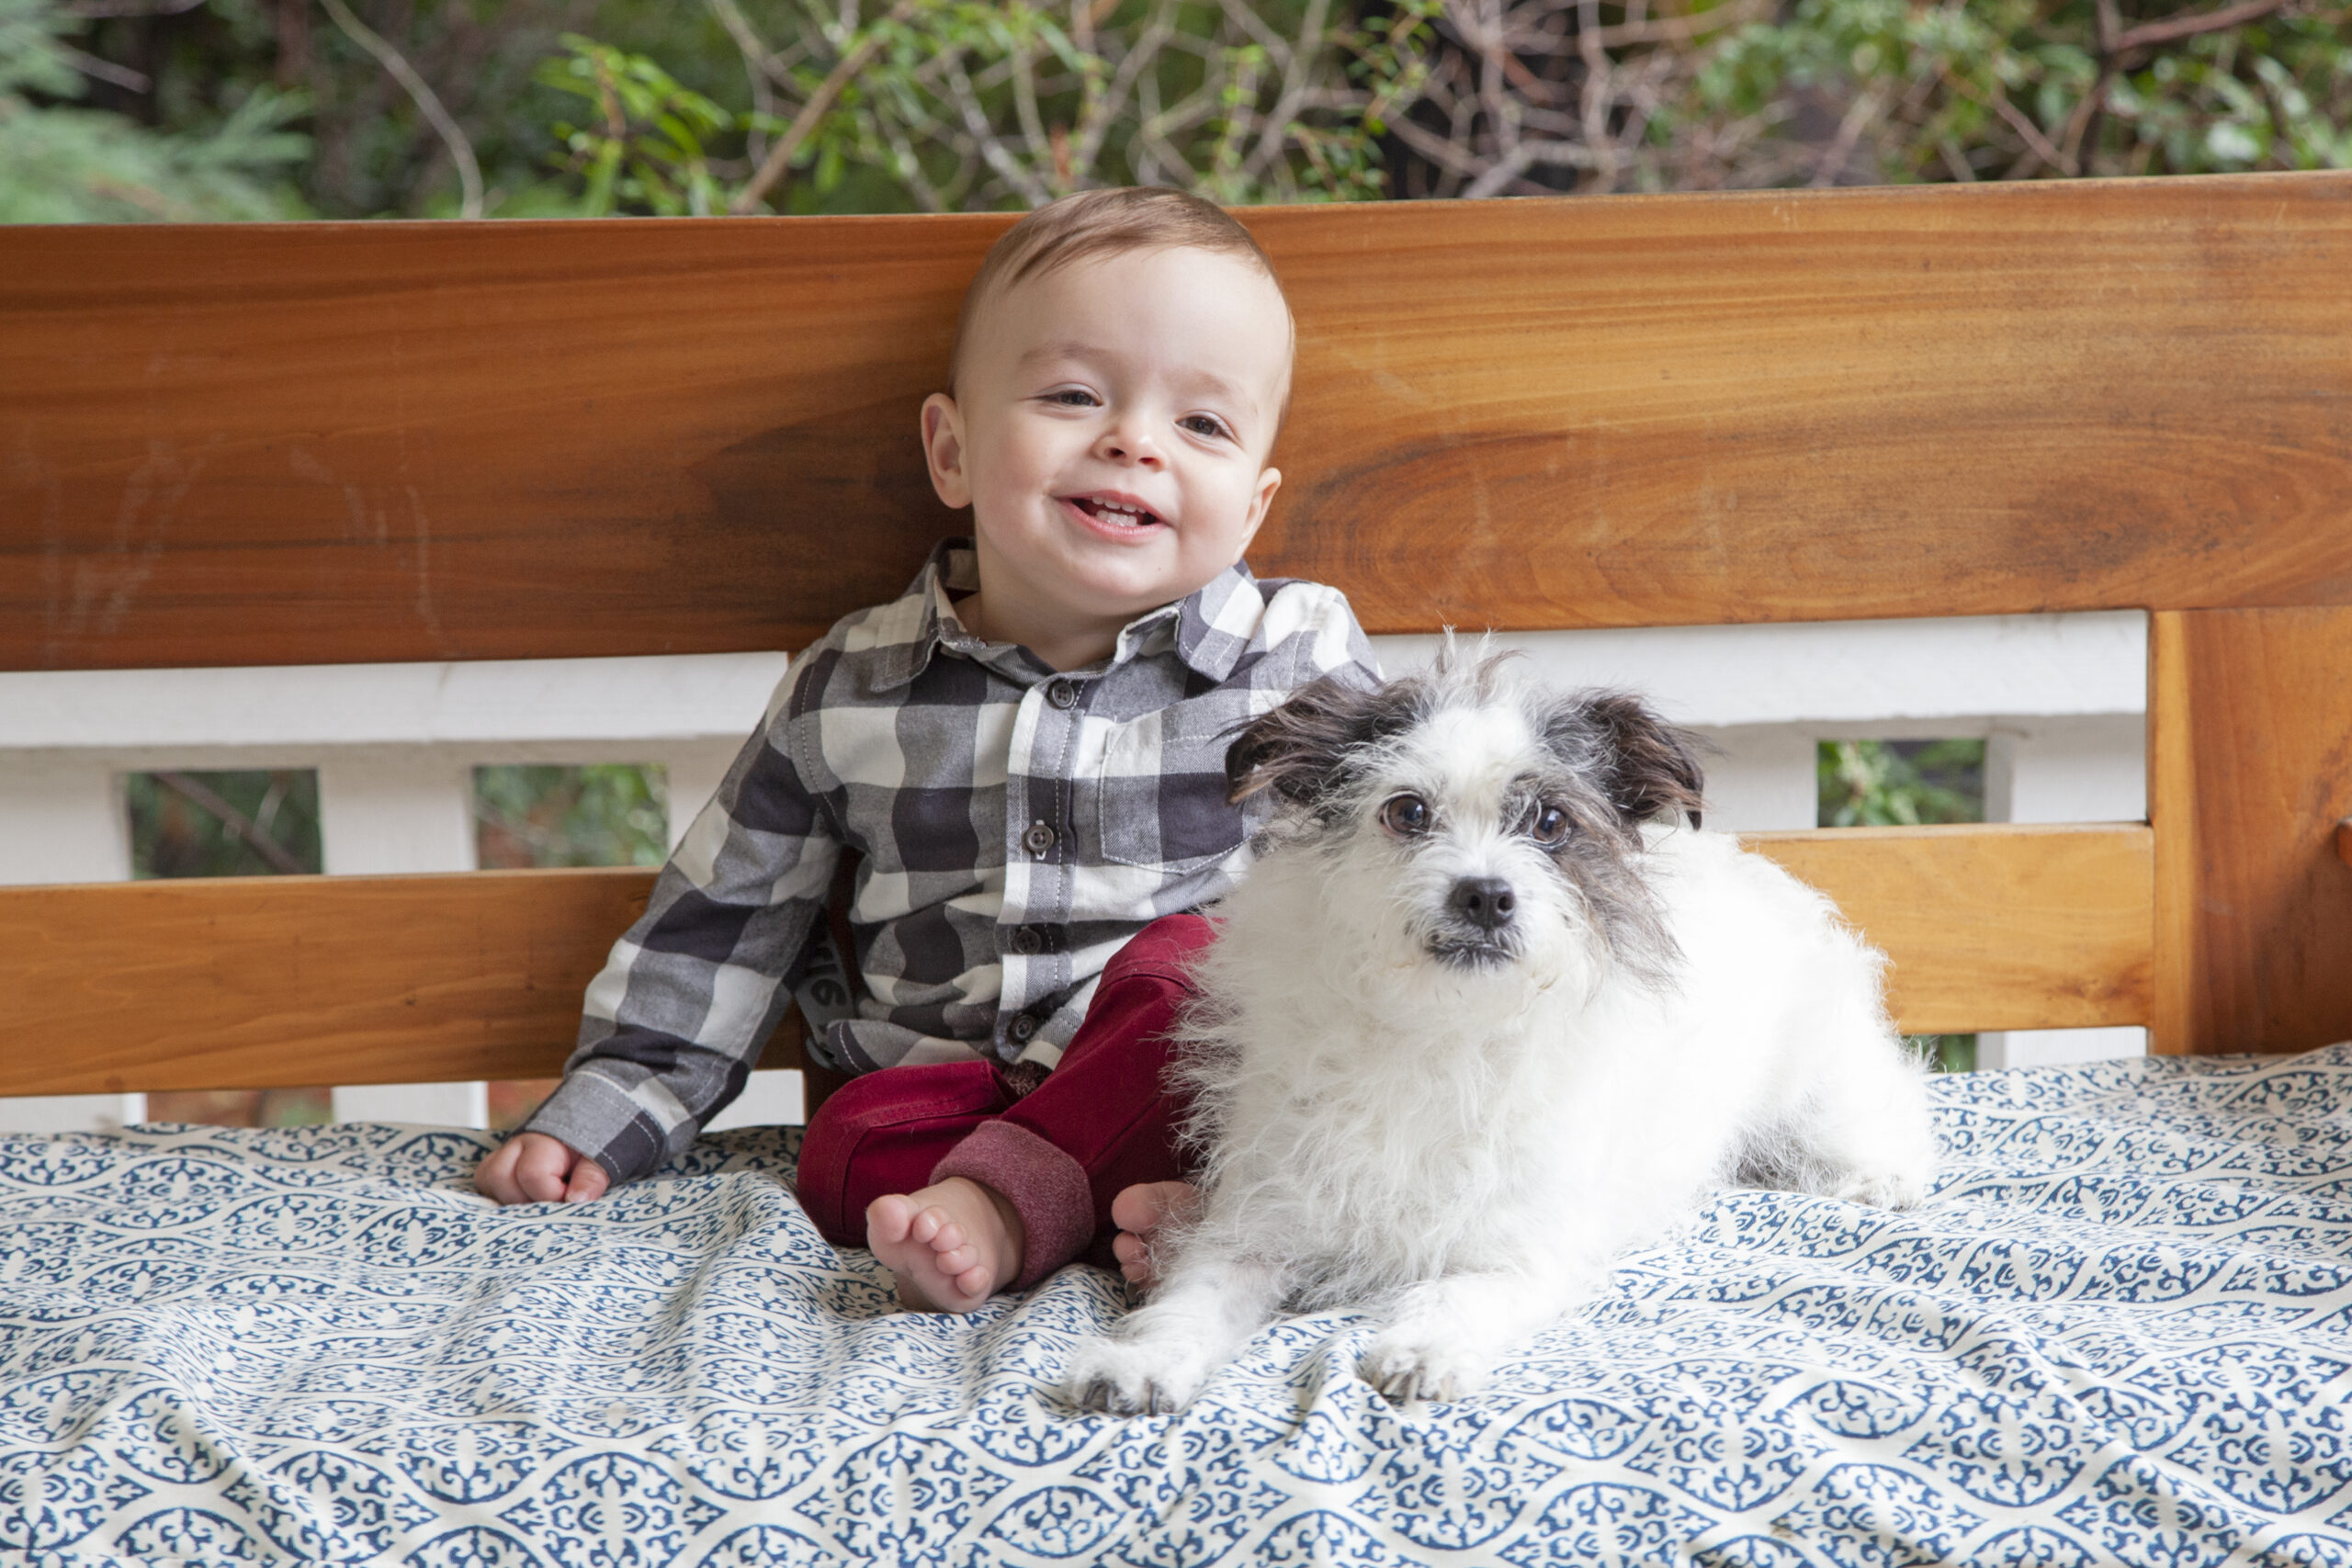 Photo of a baby and a small dog sitting together.